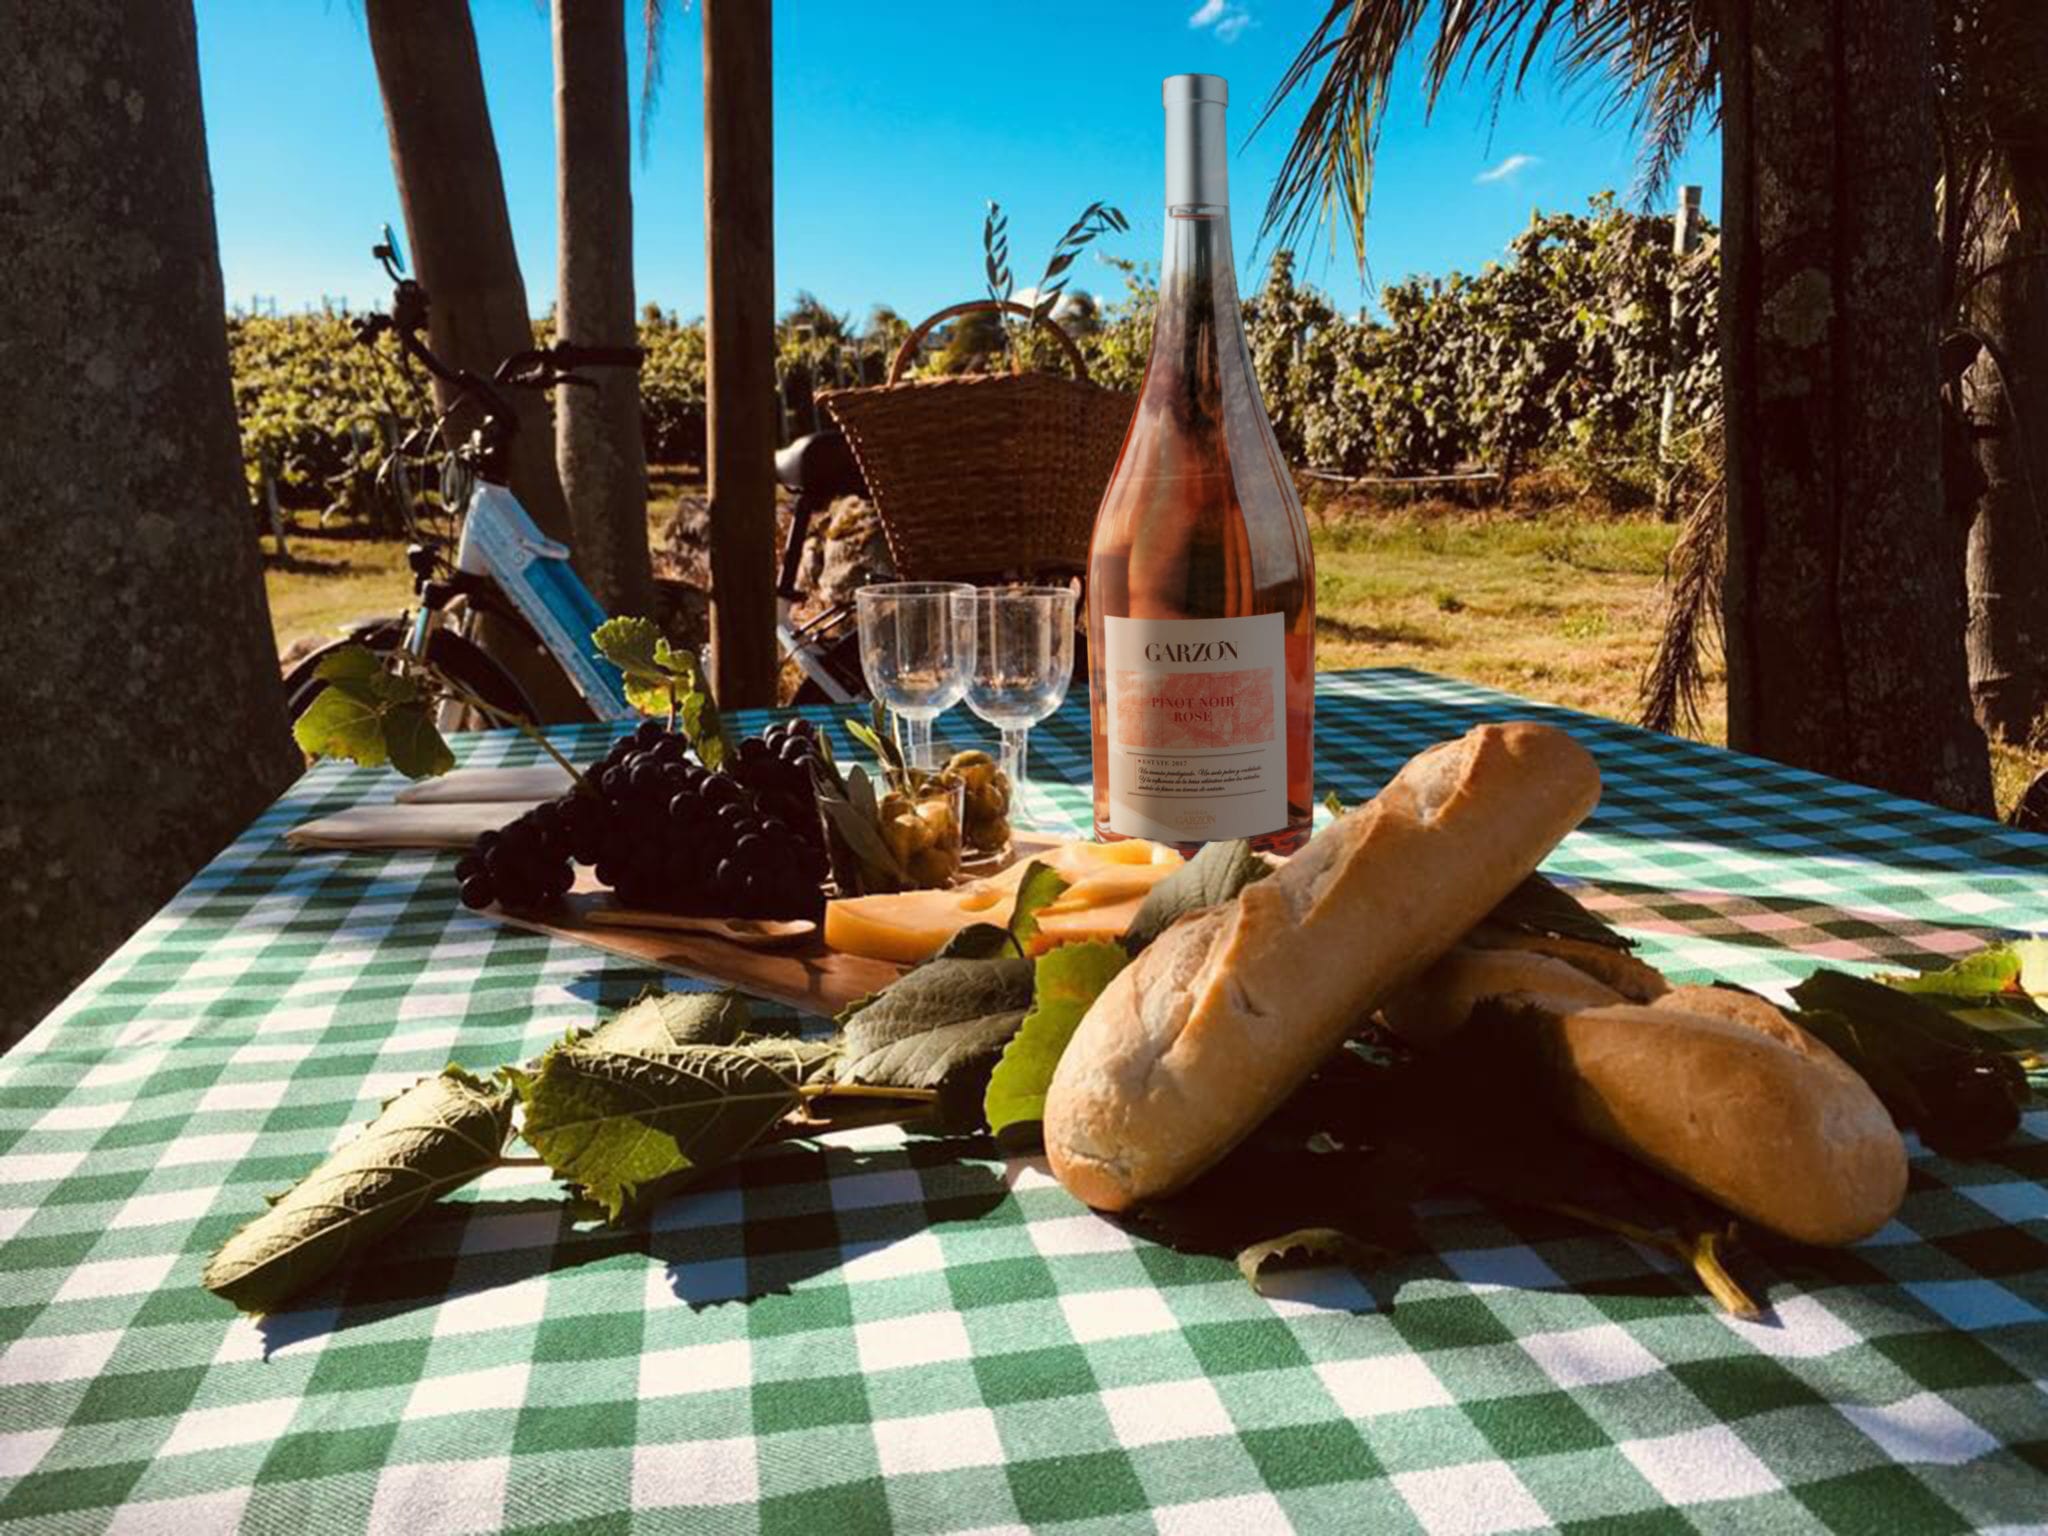 Enjoy a picnic among the vineyards and a walking or cycling tour